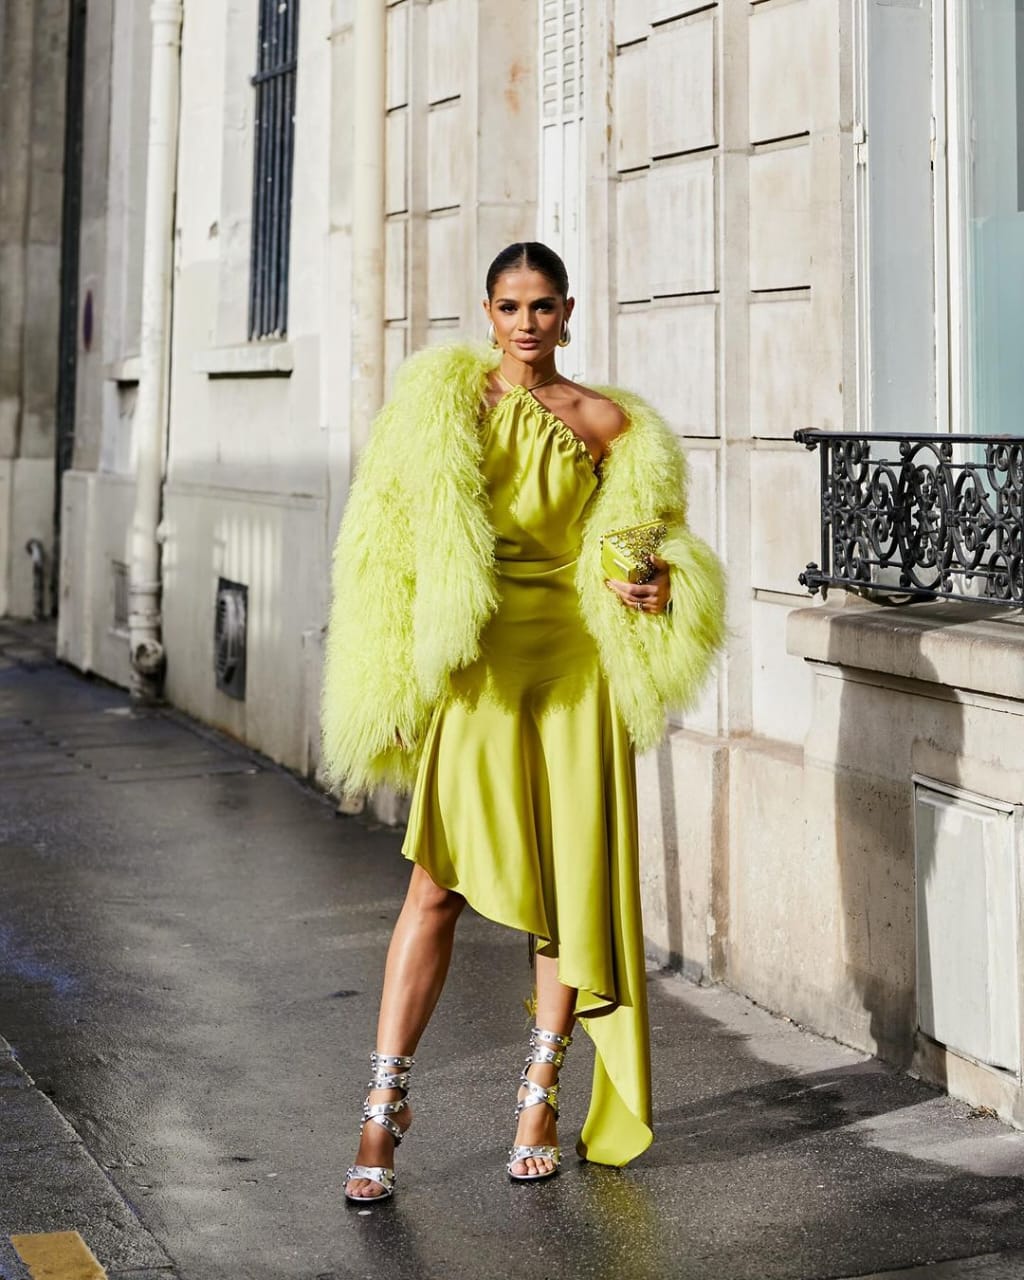 the-best-looks-on-celebs-from-paris-haute-couture-fashion-week-so-far